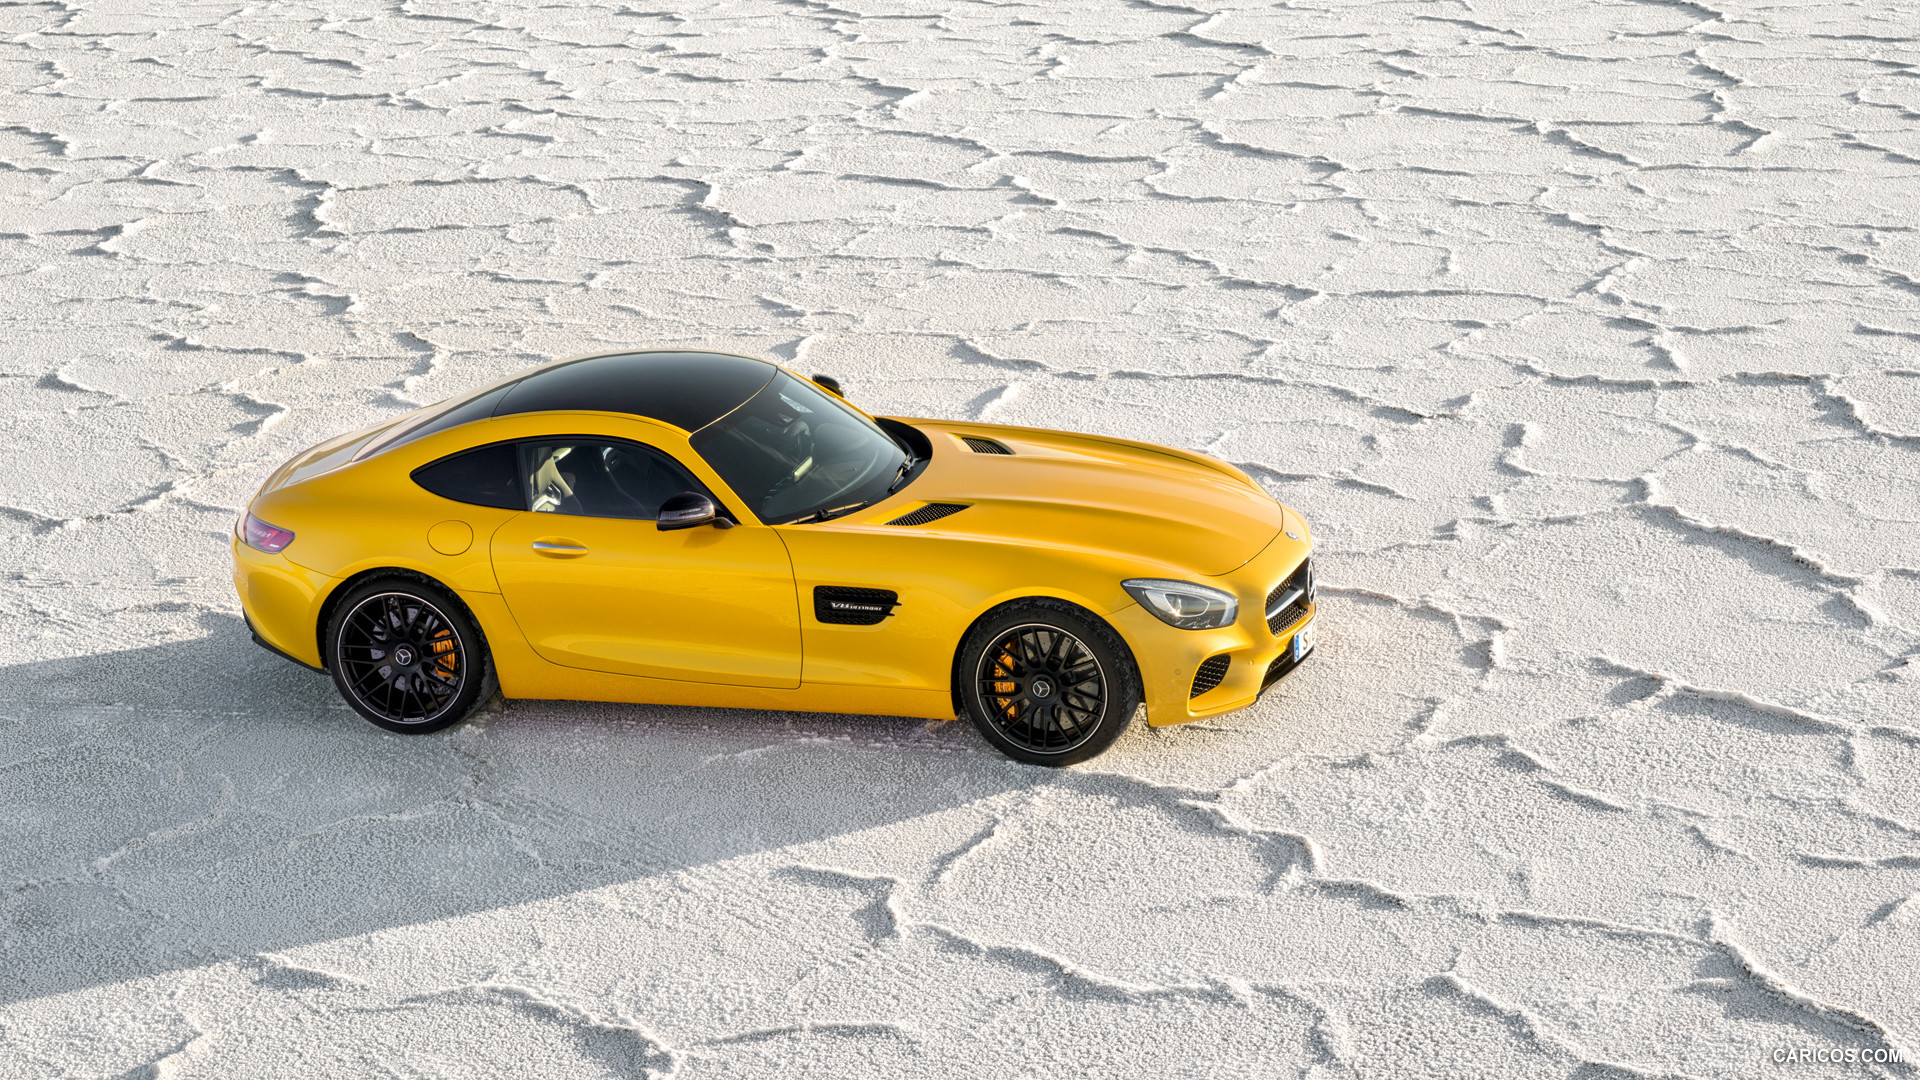 2016 Mercedes-AMG GT (Solarbeam) - Side, #75 of 190